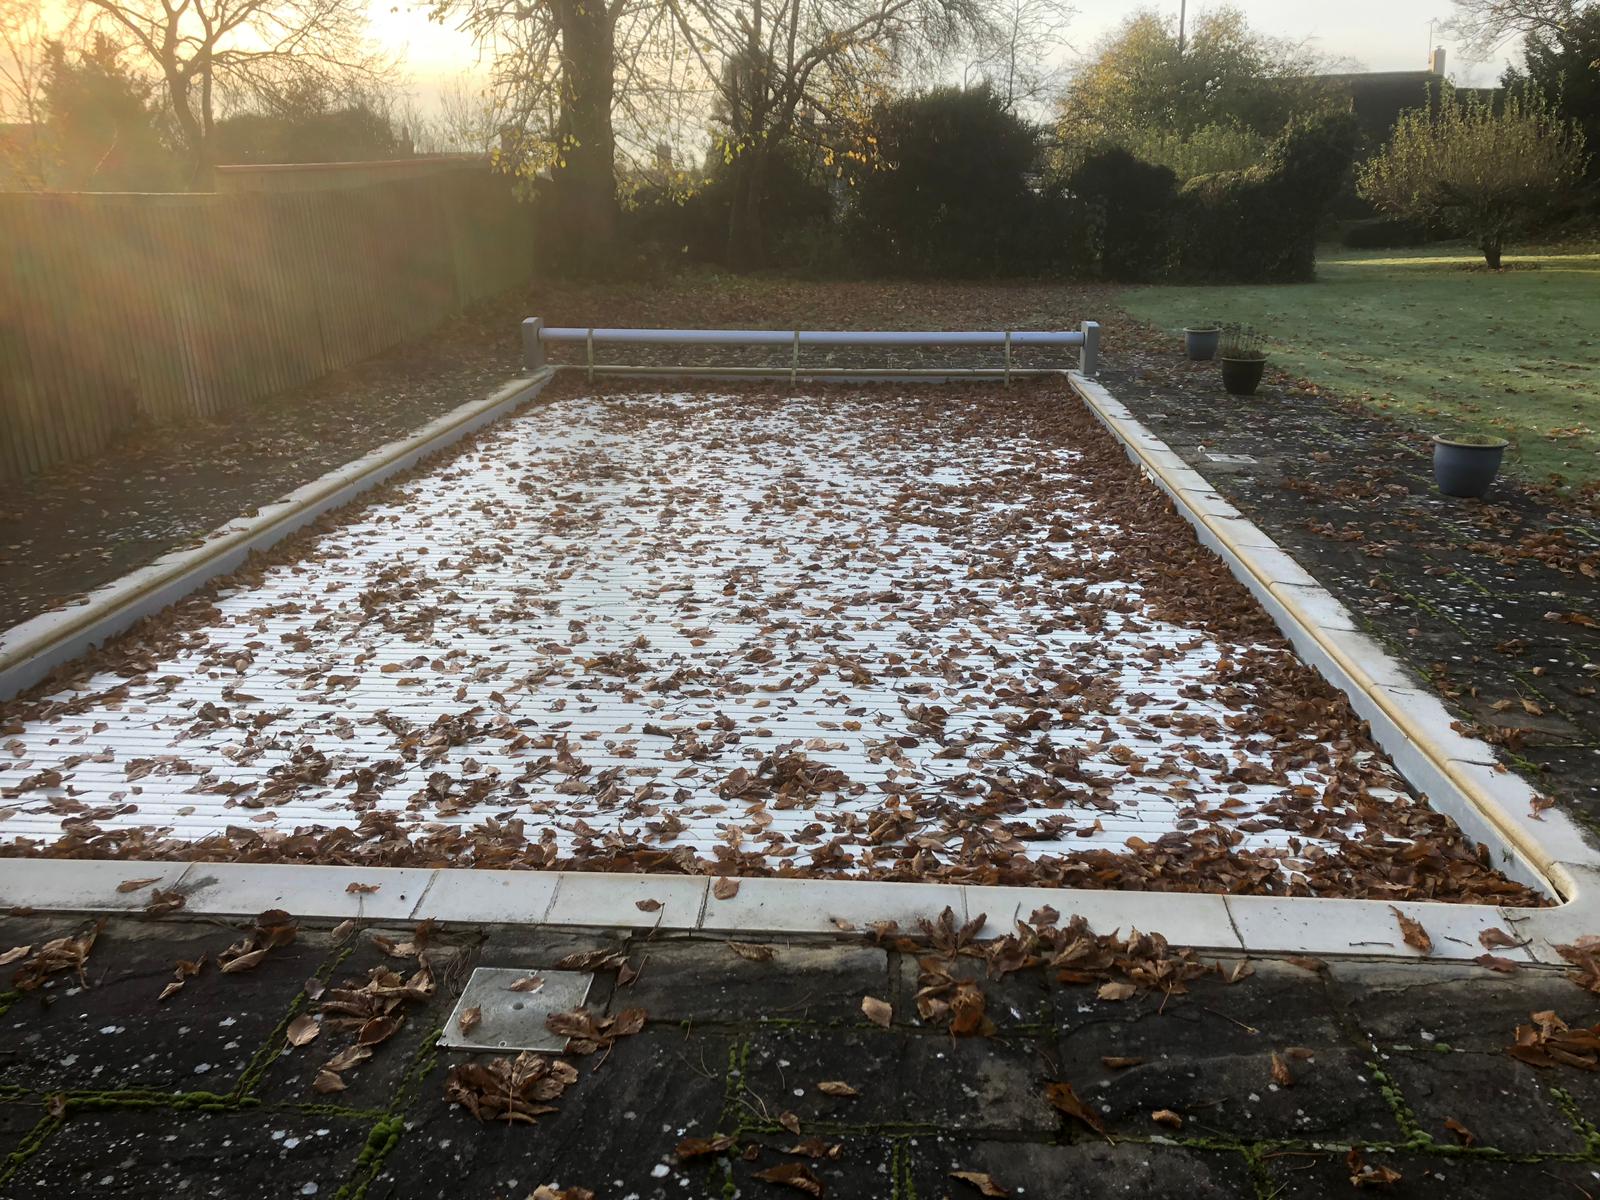 winter pool cover